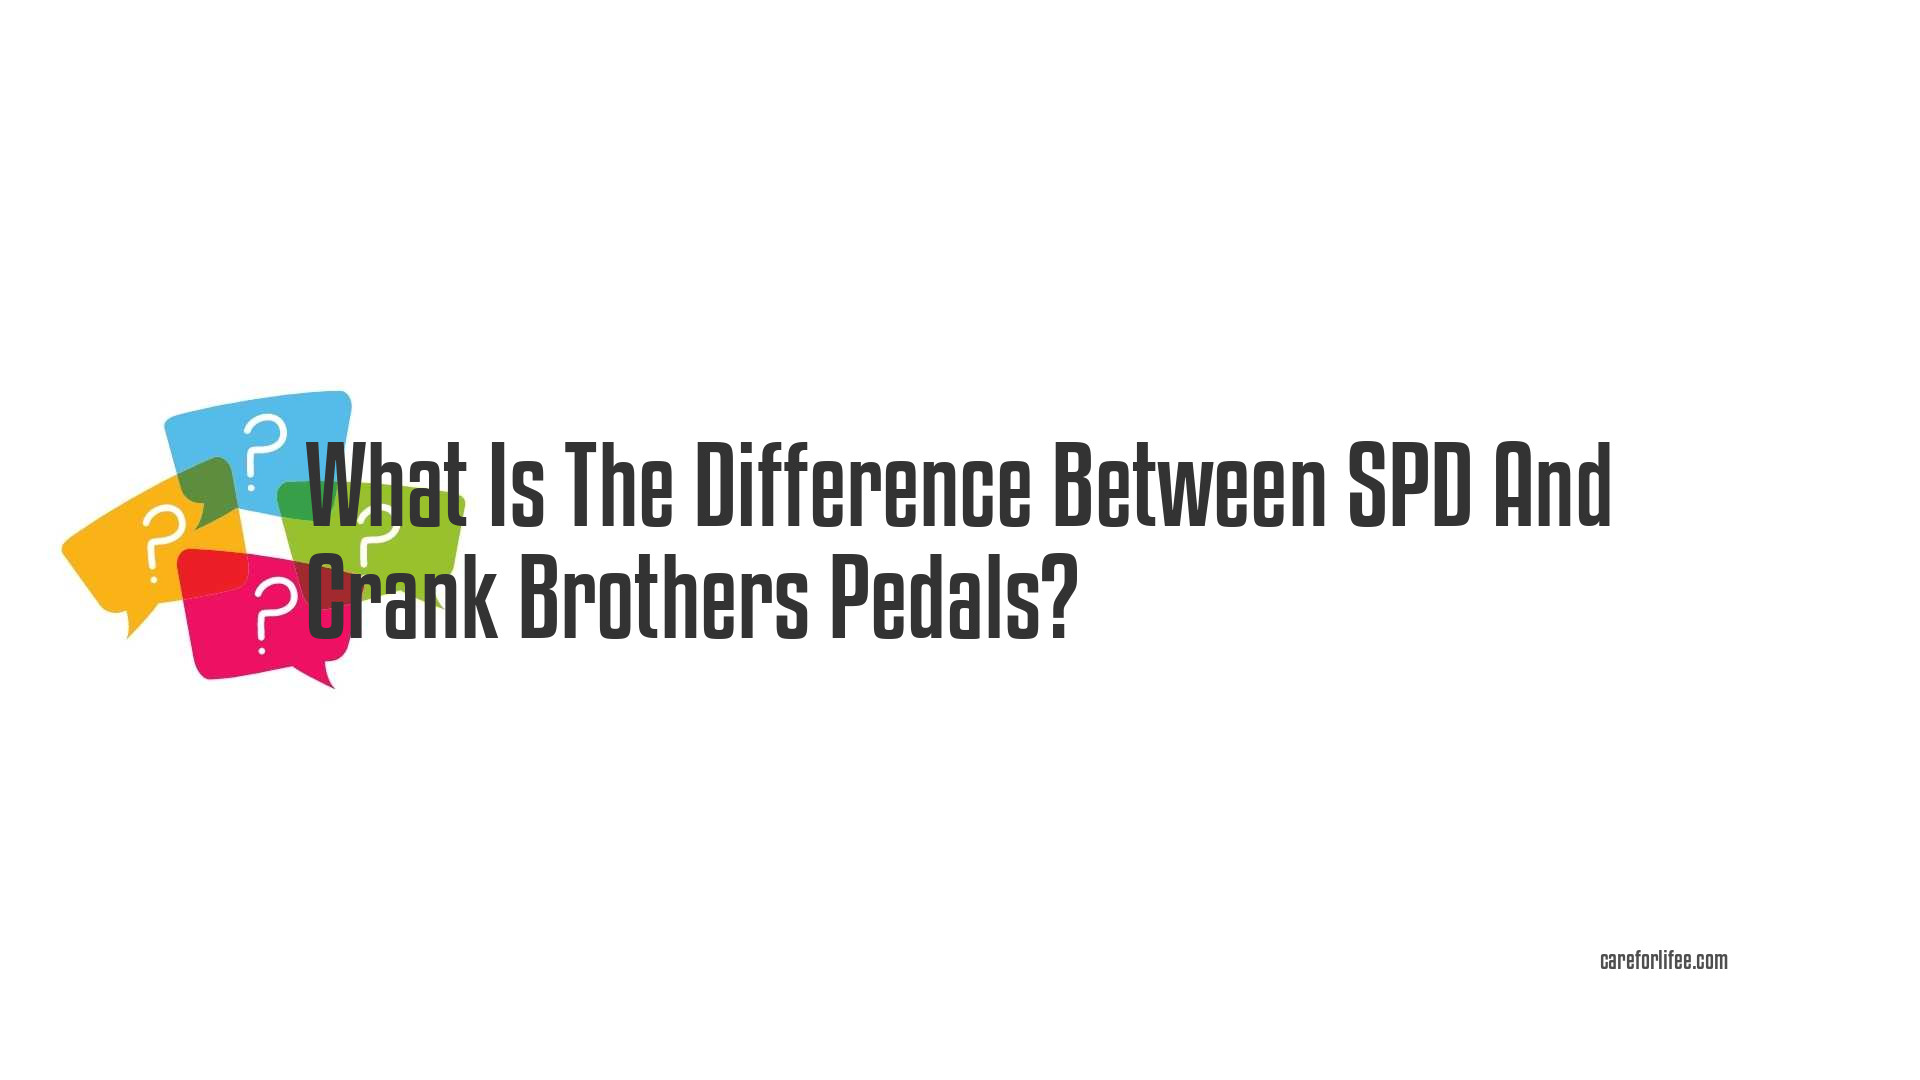 What Is The Difference Between SPD And Crank Brothers Pedals?